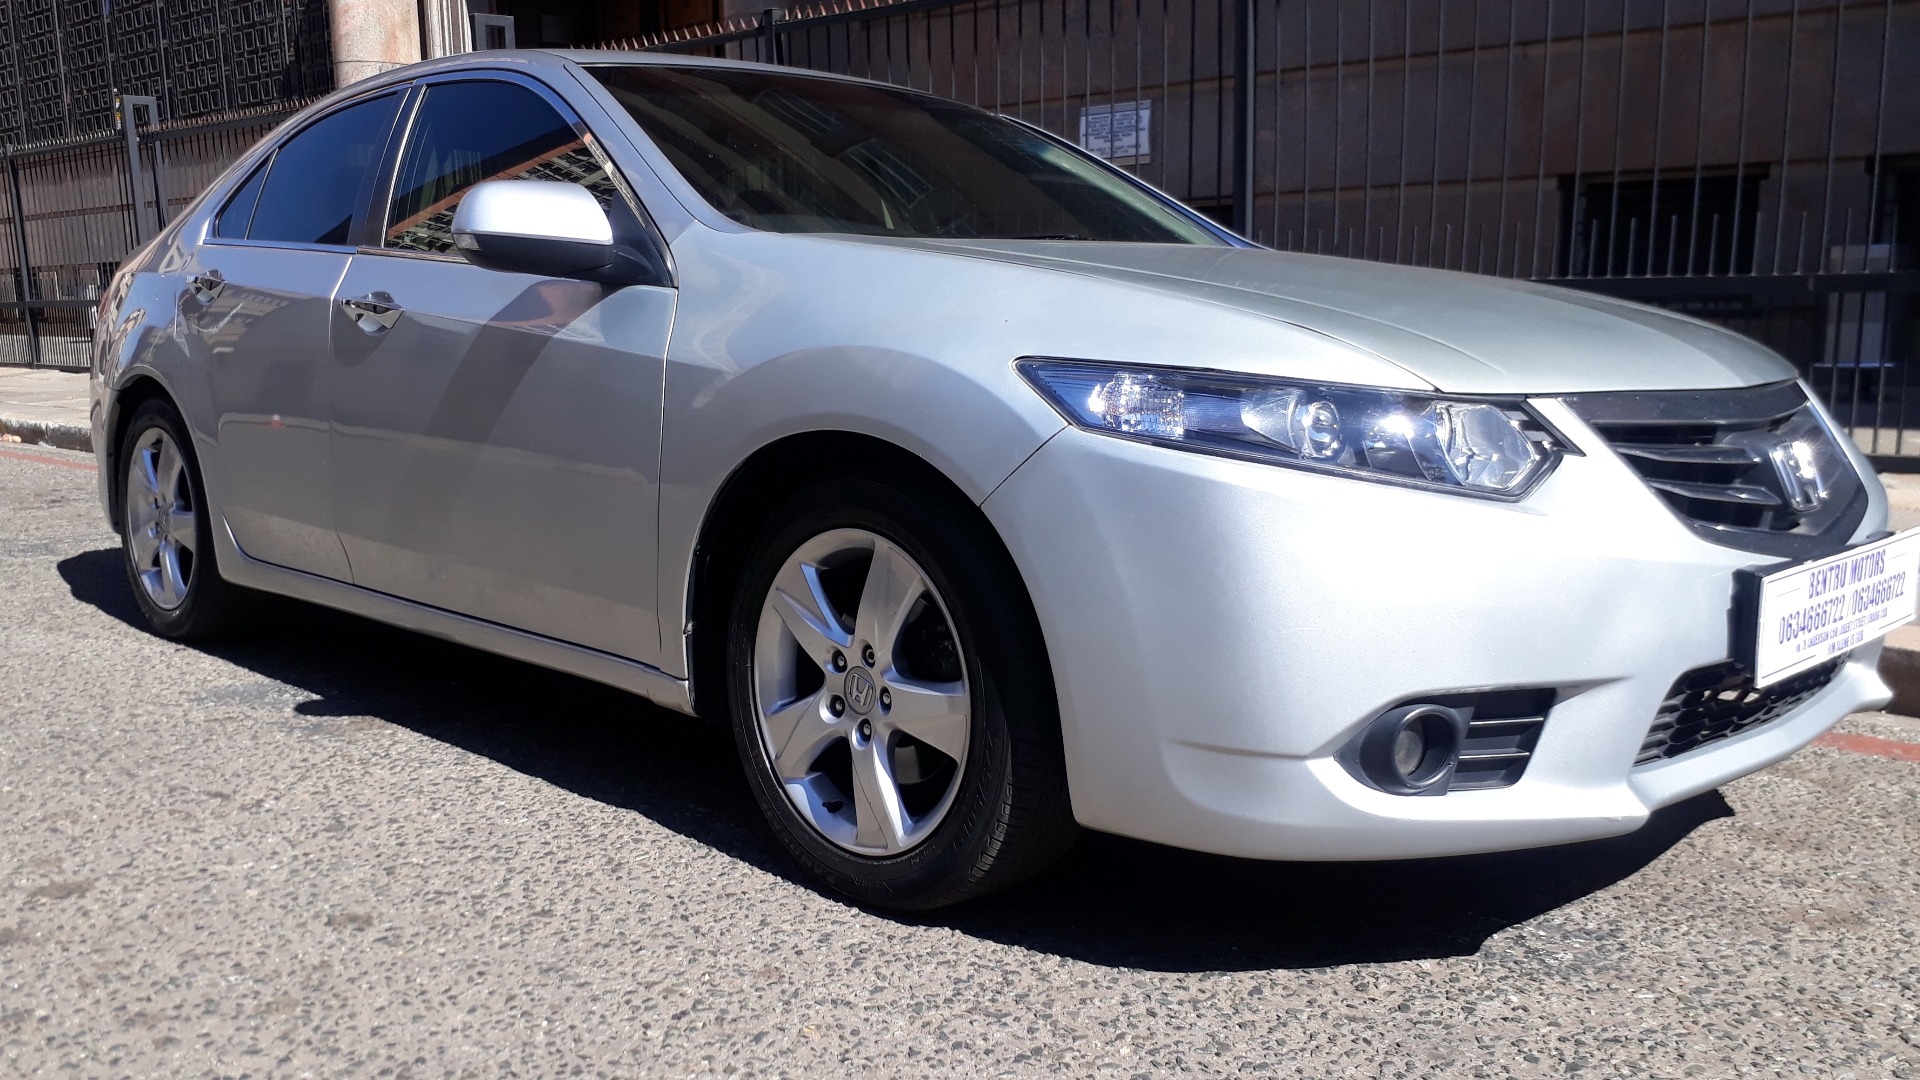 Honda Accord 2.0 automatic for sale in Gauteng  Auto Mart